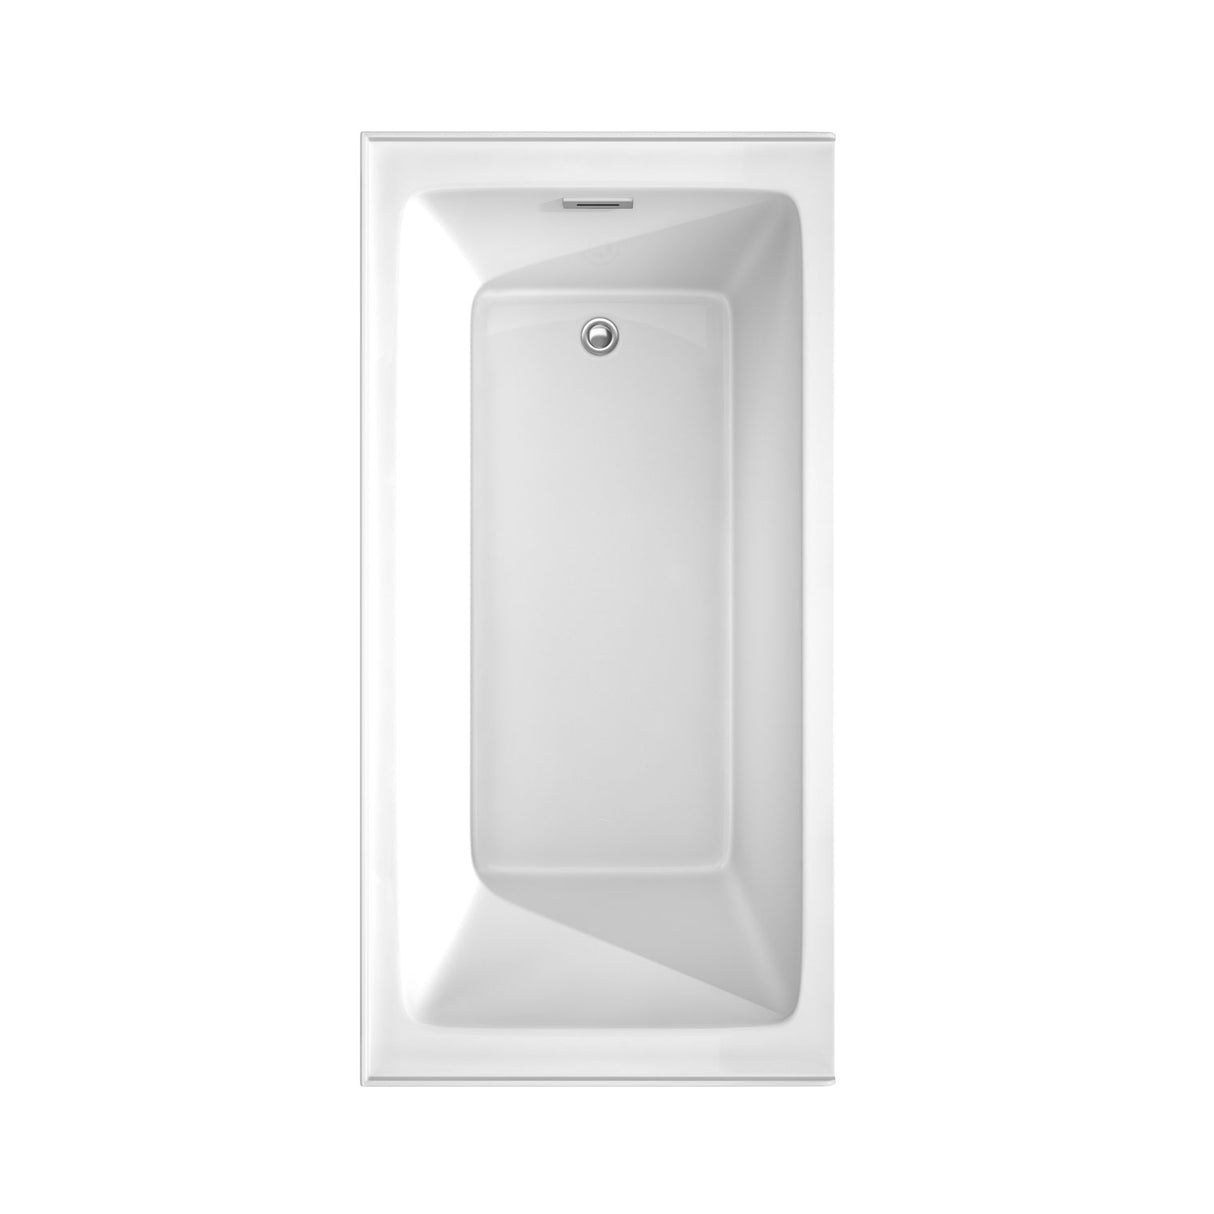 Grayley 60 x 30 Inch Alcove Bathtub in White with Right-Hand Drain and Overflow Trim in Polished Chrome